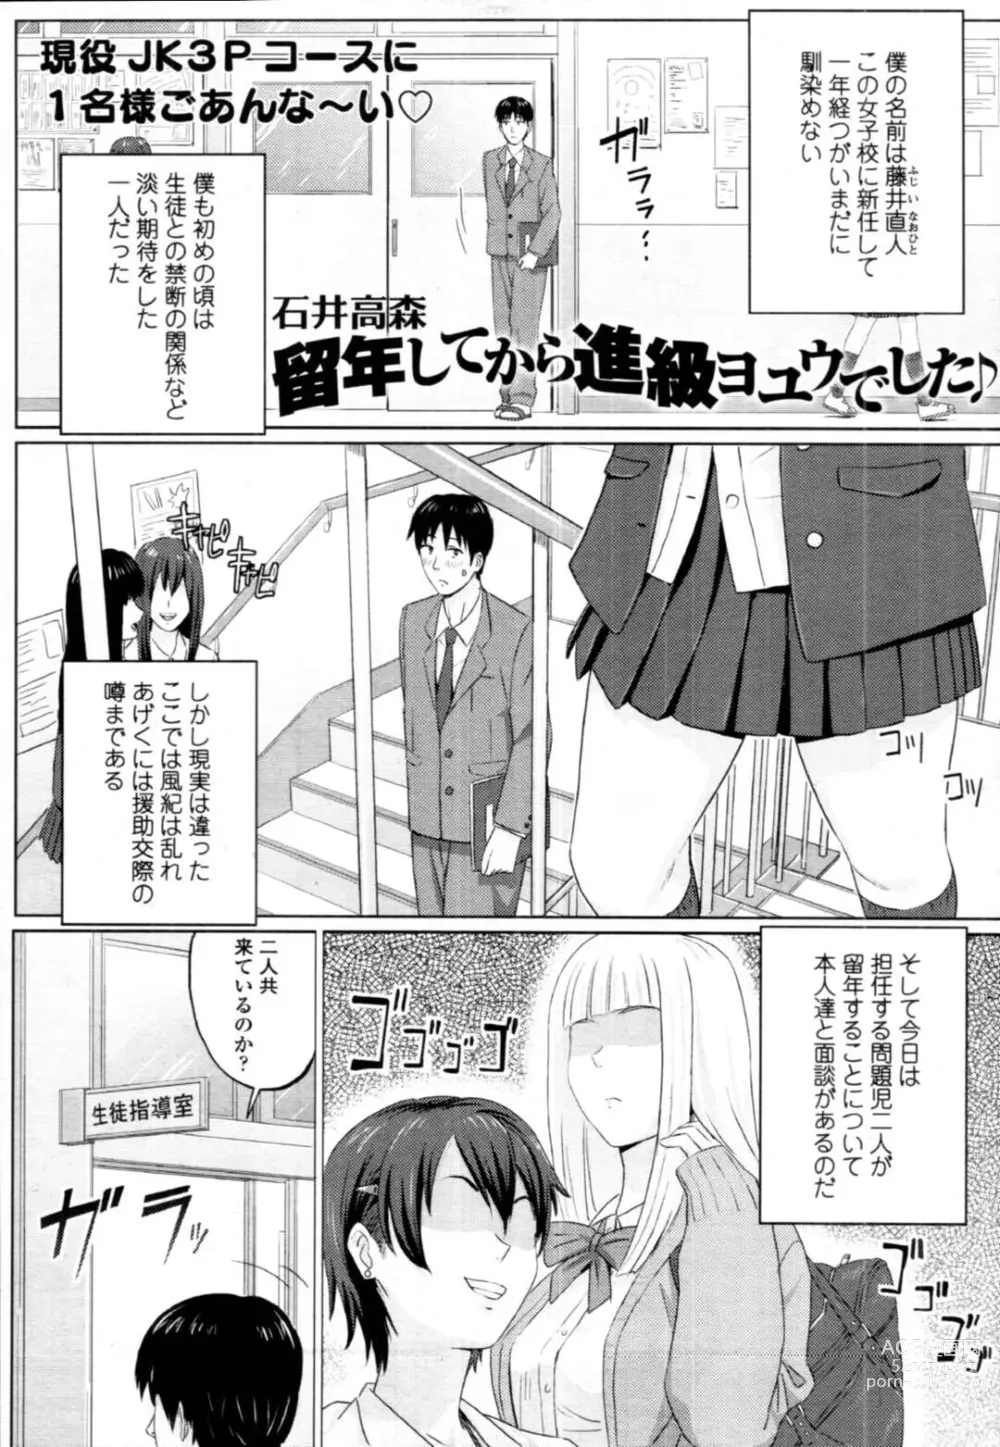 Page 1 of doujinshi Sassy Gal JKs Having Harem Sex with Teachers... Lewd Girls Climax by Letting Him Fuck Them Vaginally and Anally!